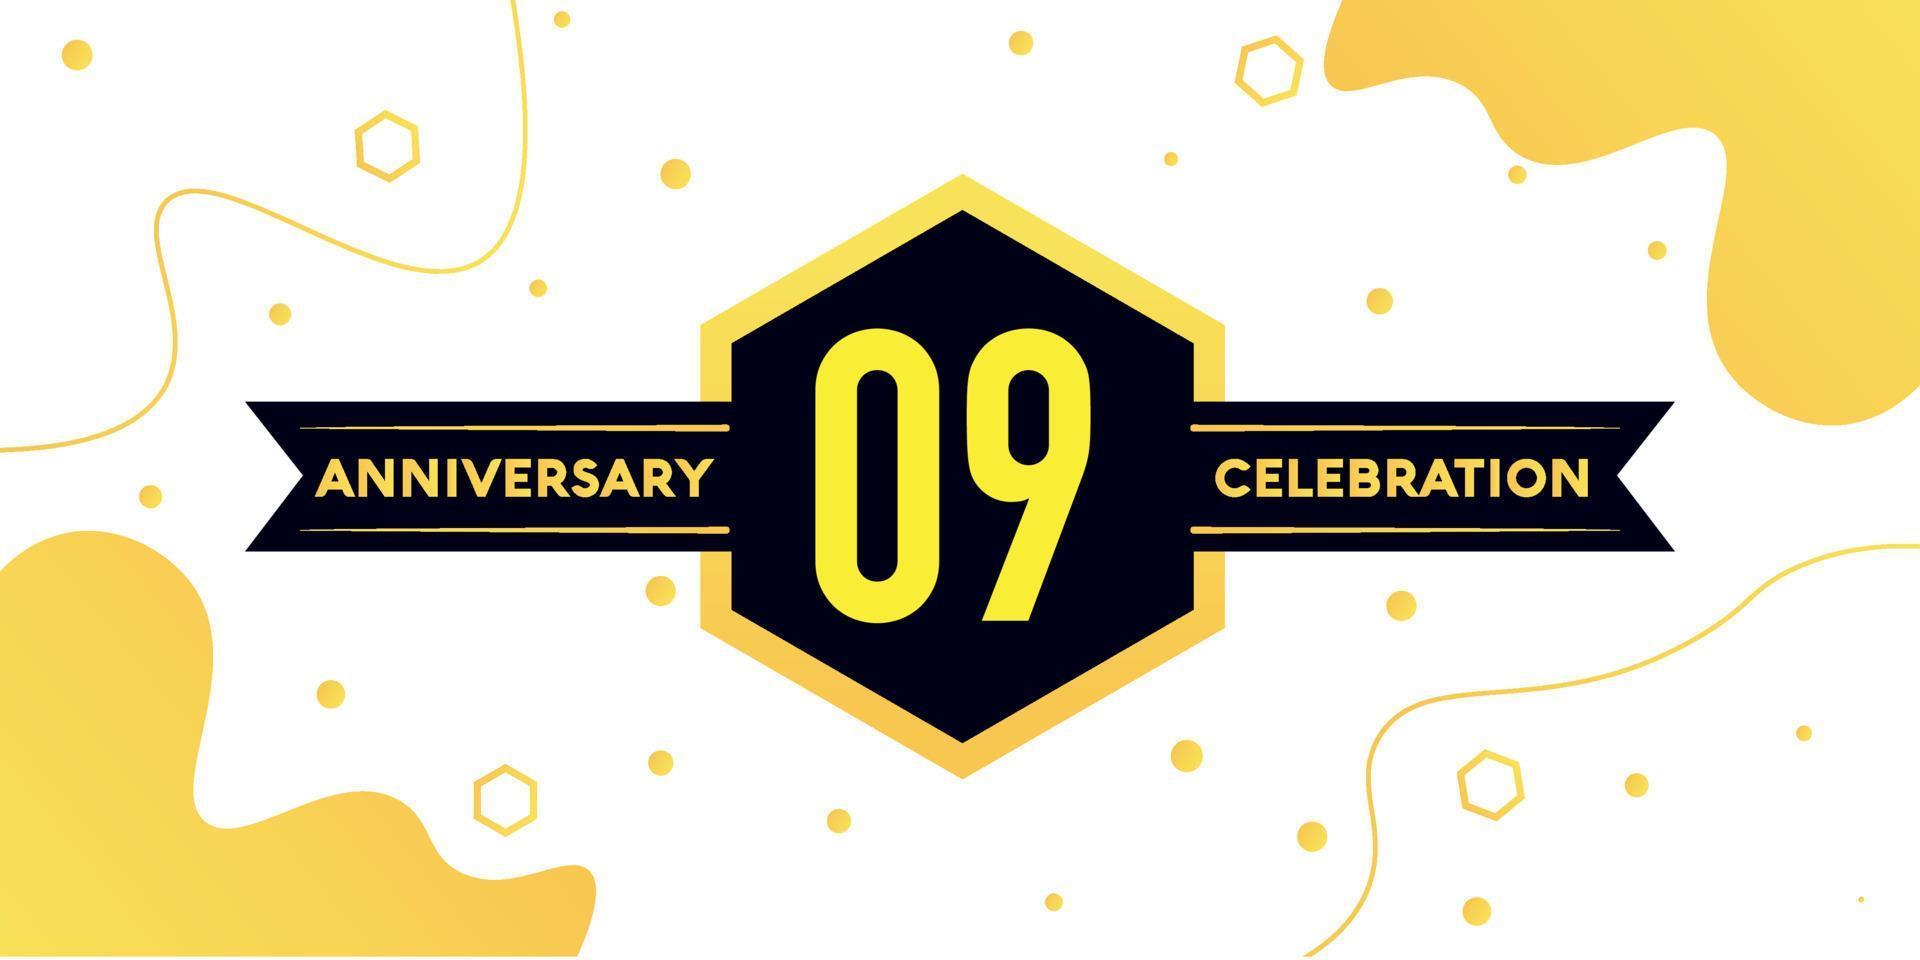 09 years anniversary logo vector design with yellow geometric shape with black and abstract design on white background template